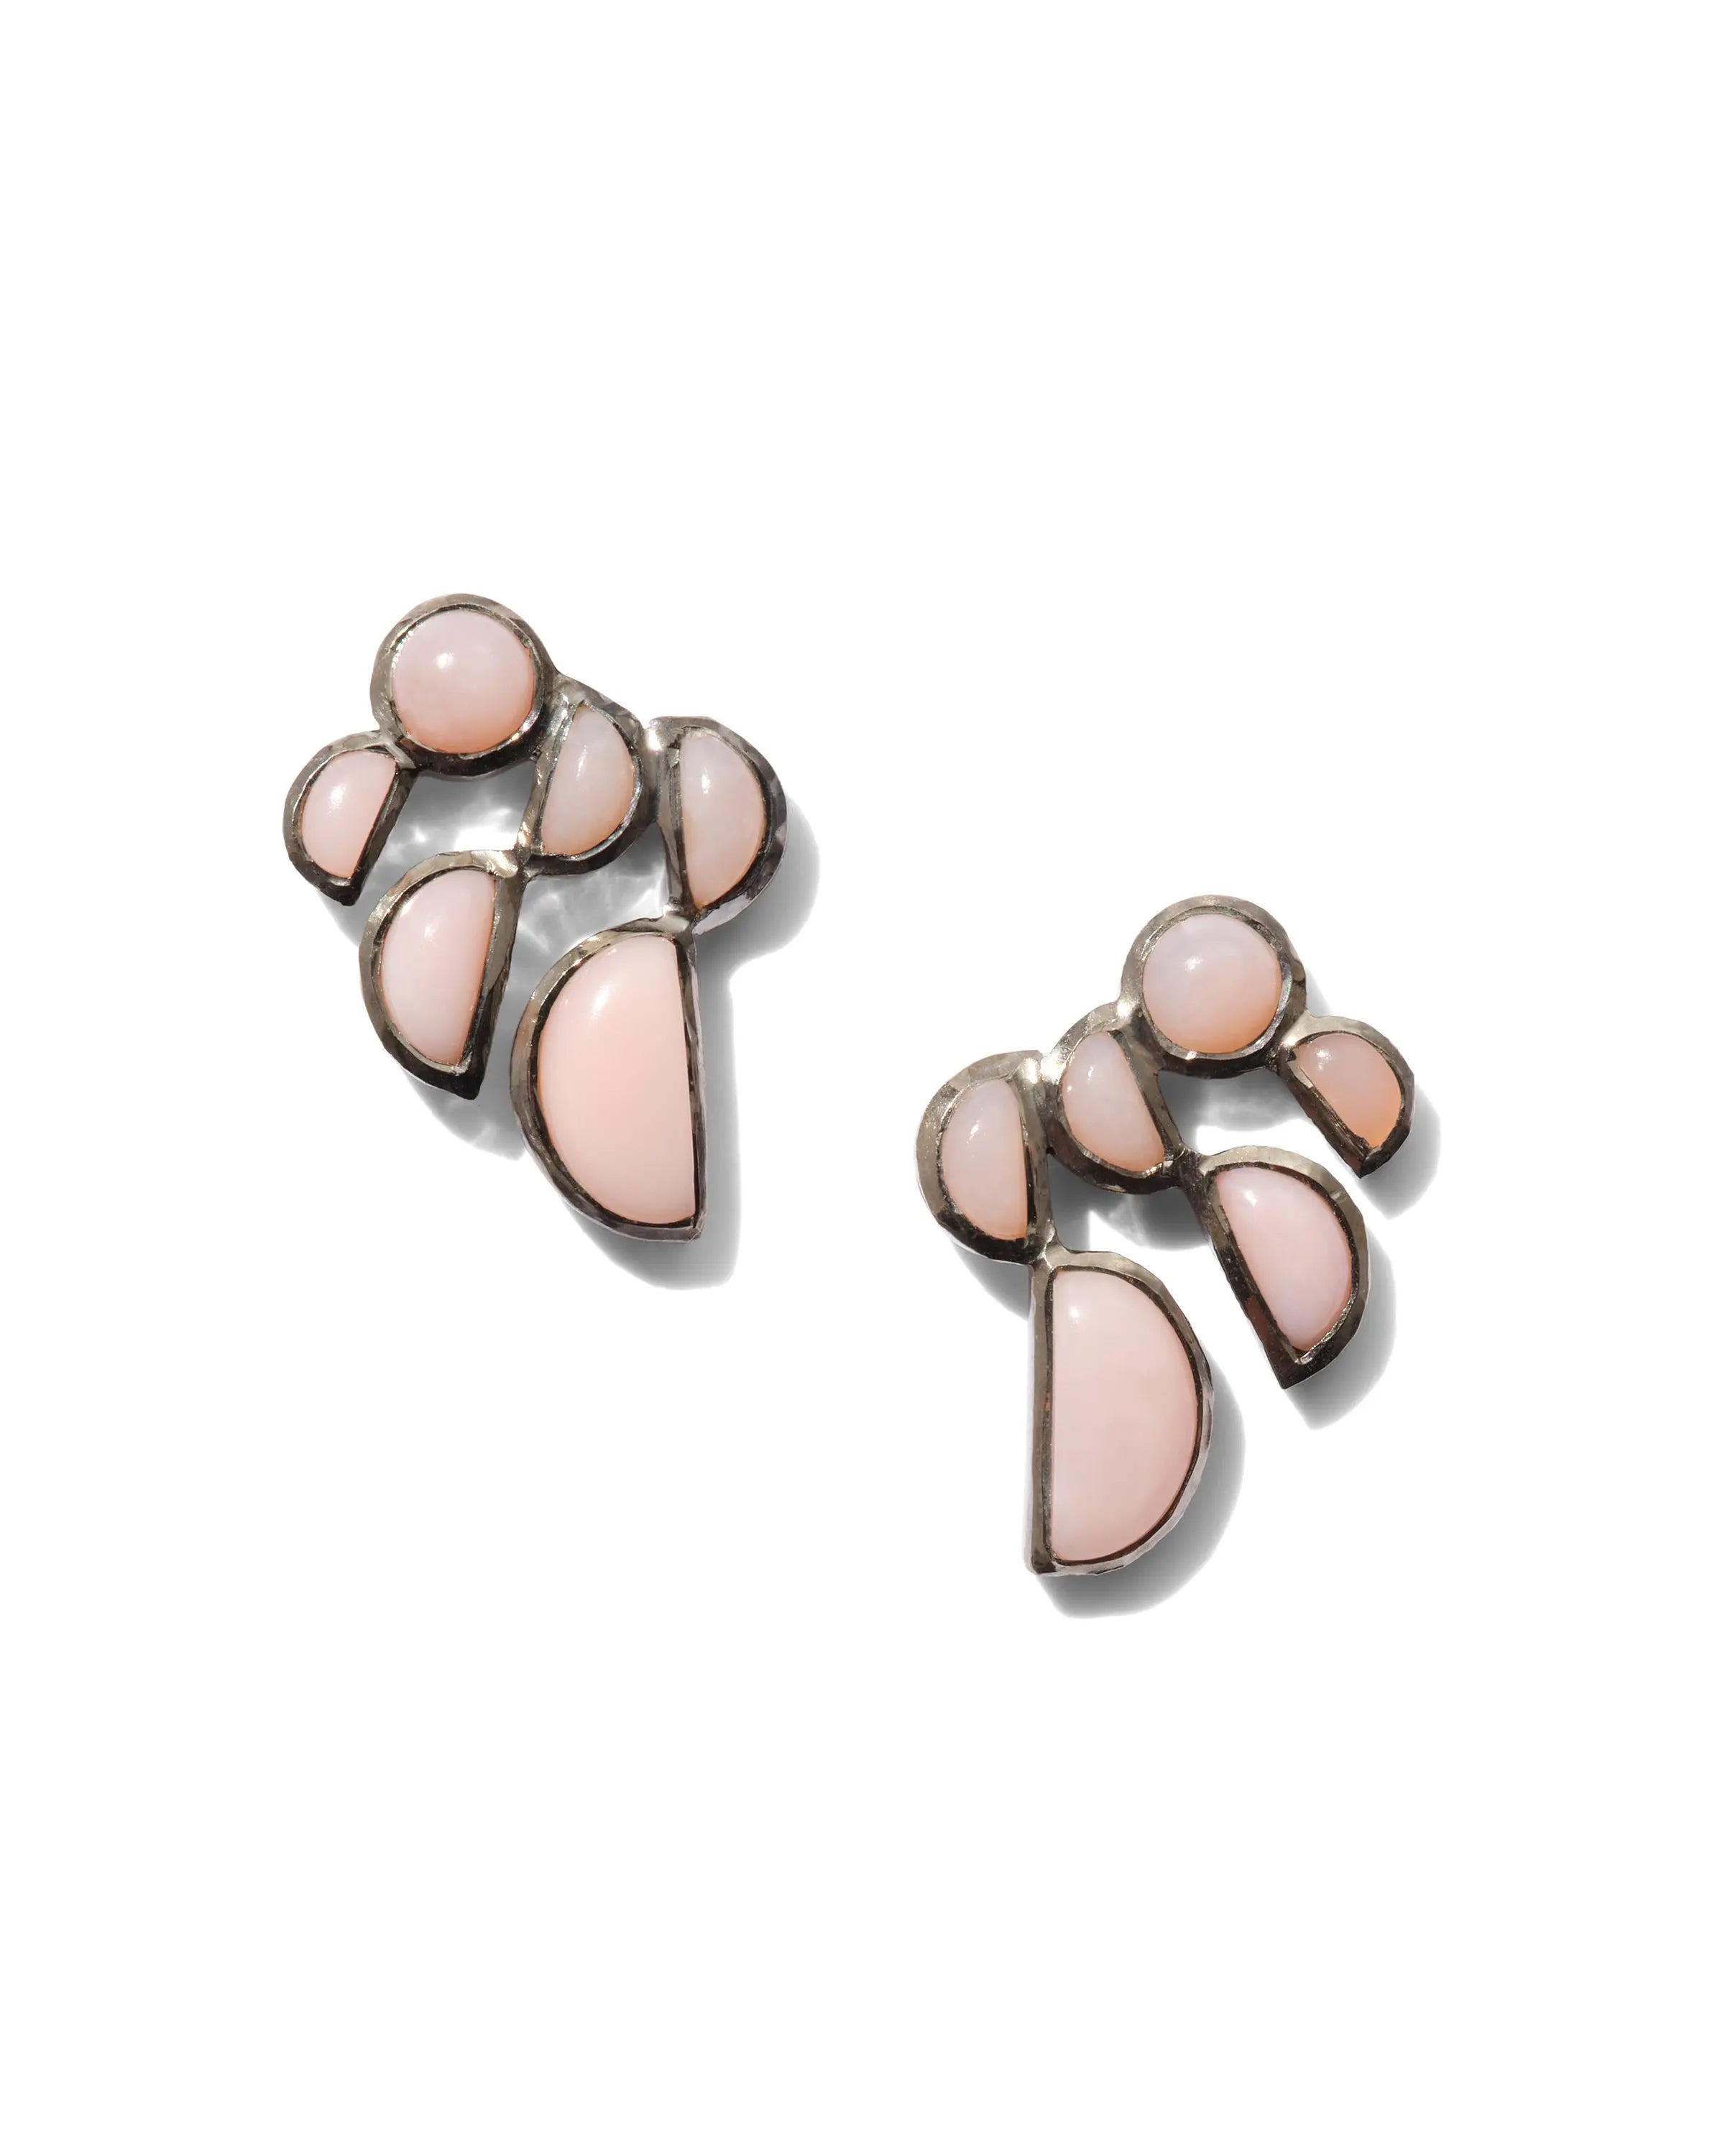 Designed by Nak Armstrong these earrings are so much fun. They are set in sterling silver with a black rhodium finish and pink opal. They measure 3/4" in diameter and are post and nut closure.